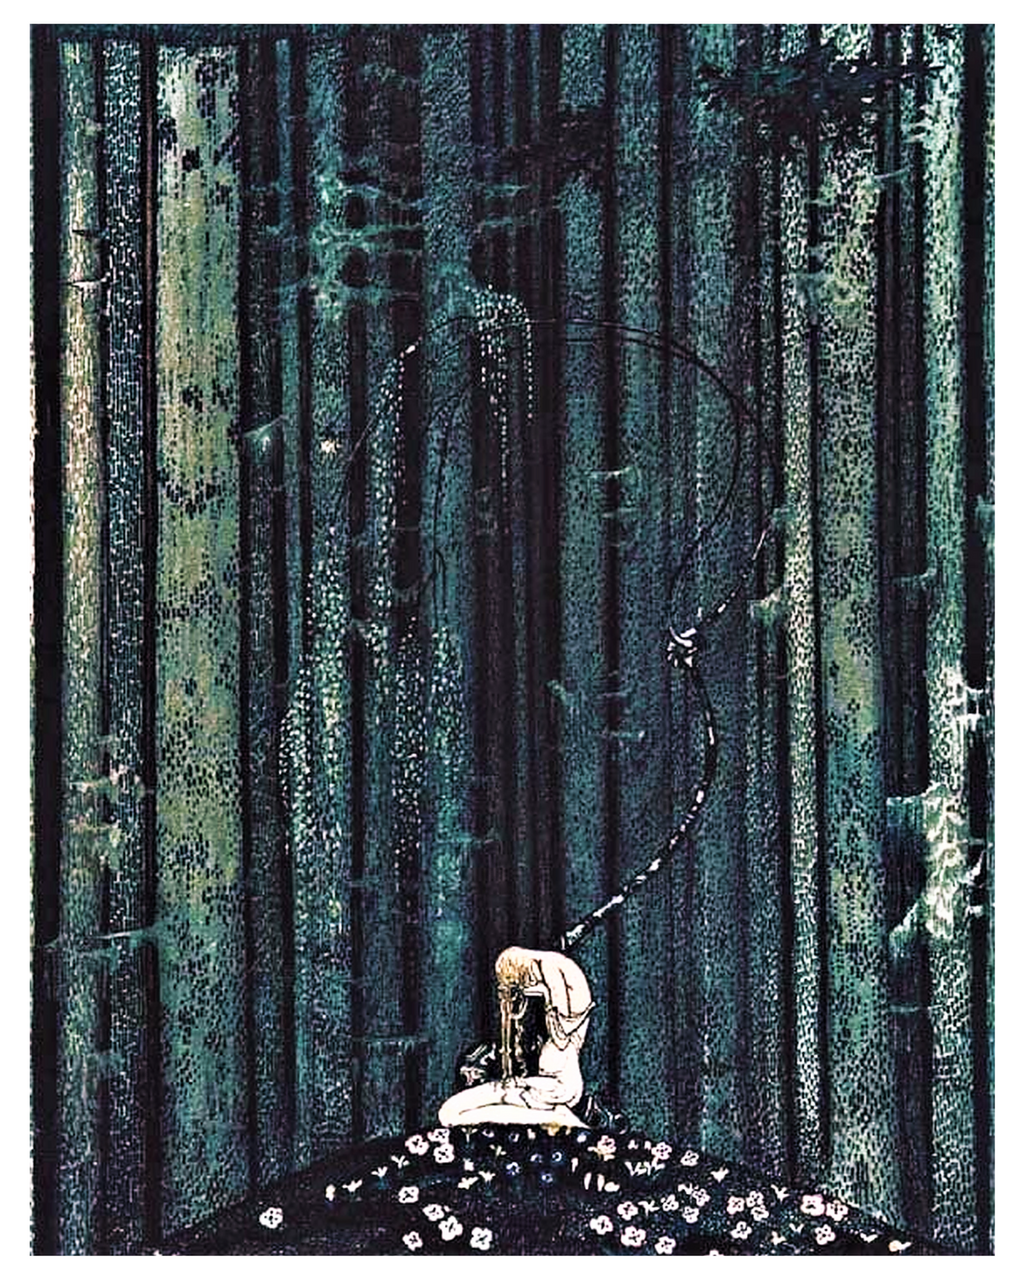 Fairytale & Folklore Poster - Kay Nielsen, East of the Sun West of the Moon, Gloomy Wood, 8X10, shop.Orkneyology.com